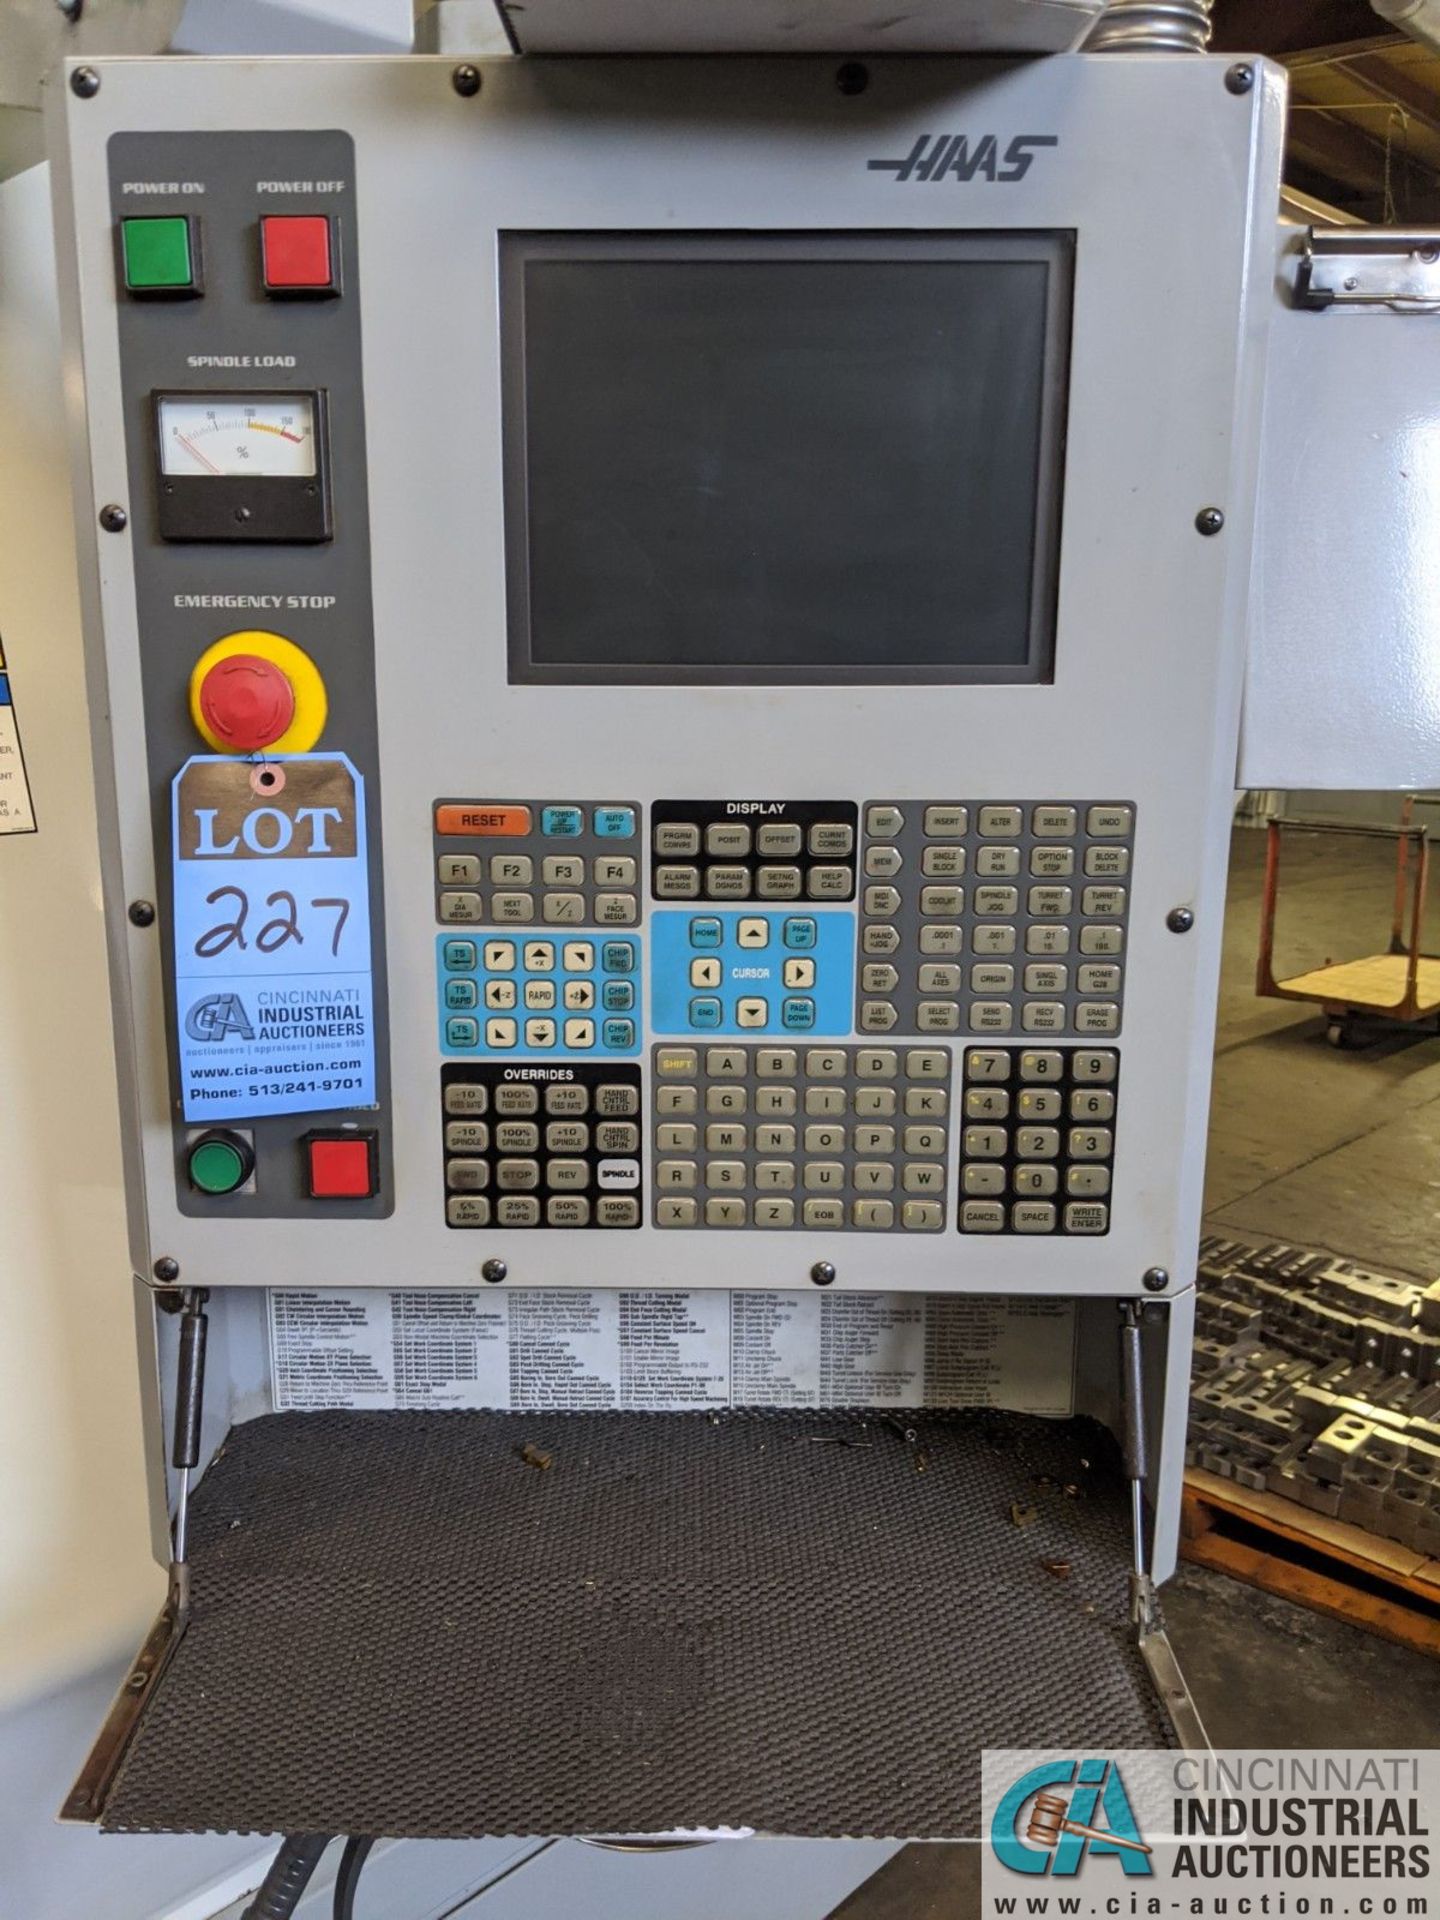 HAAS MODEL SL-40T CNC TURNING CENTER; S/N 69082, 18" 3-JAW CHUCK, 10 POSITION TURRET, TAILSTOCK, - Image 3 of 14